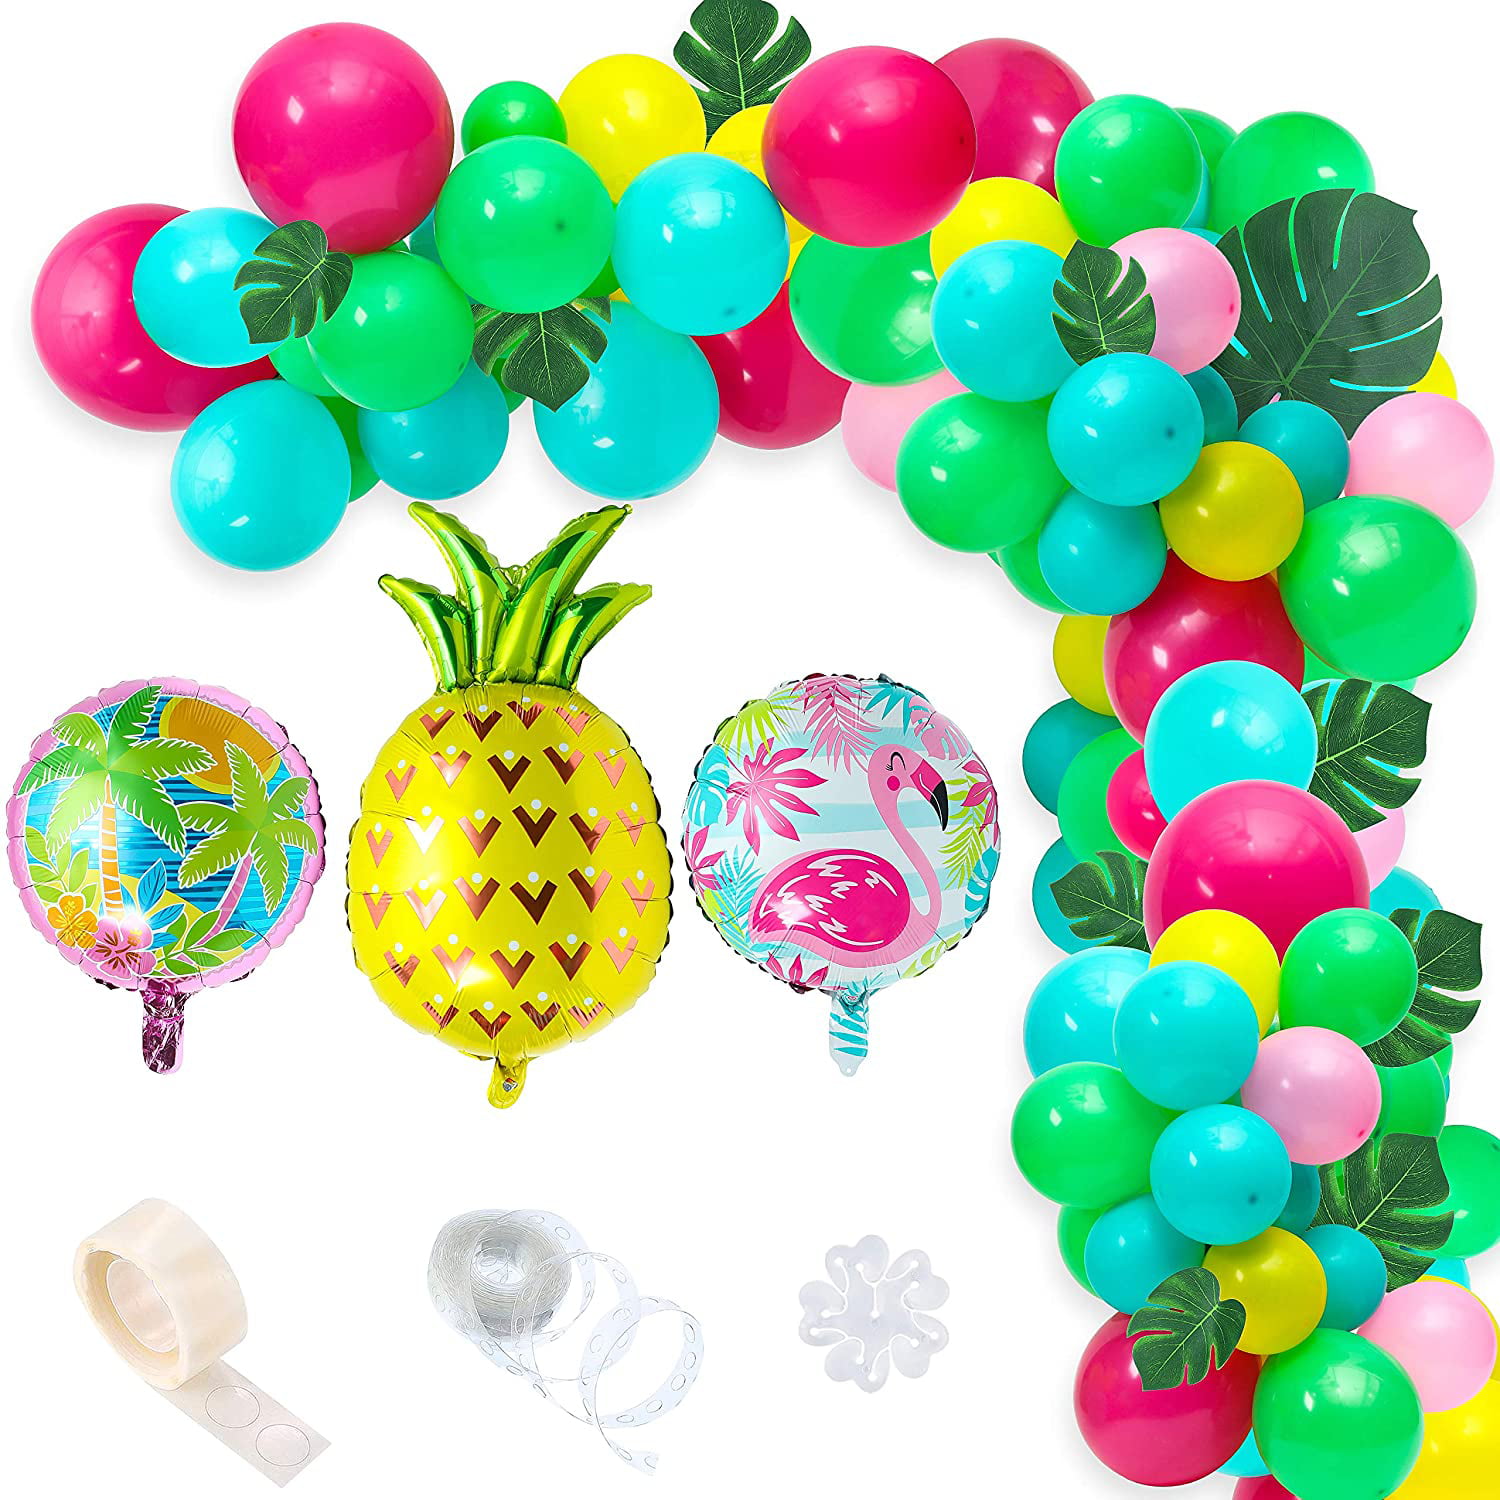 Details about  / Flamingo Designs Birthday Balloons Star Pineapple Hawaiian Party Decorations New